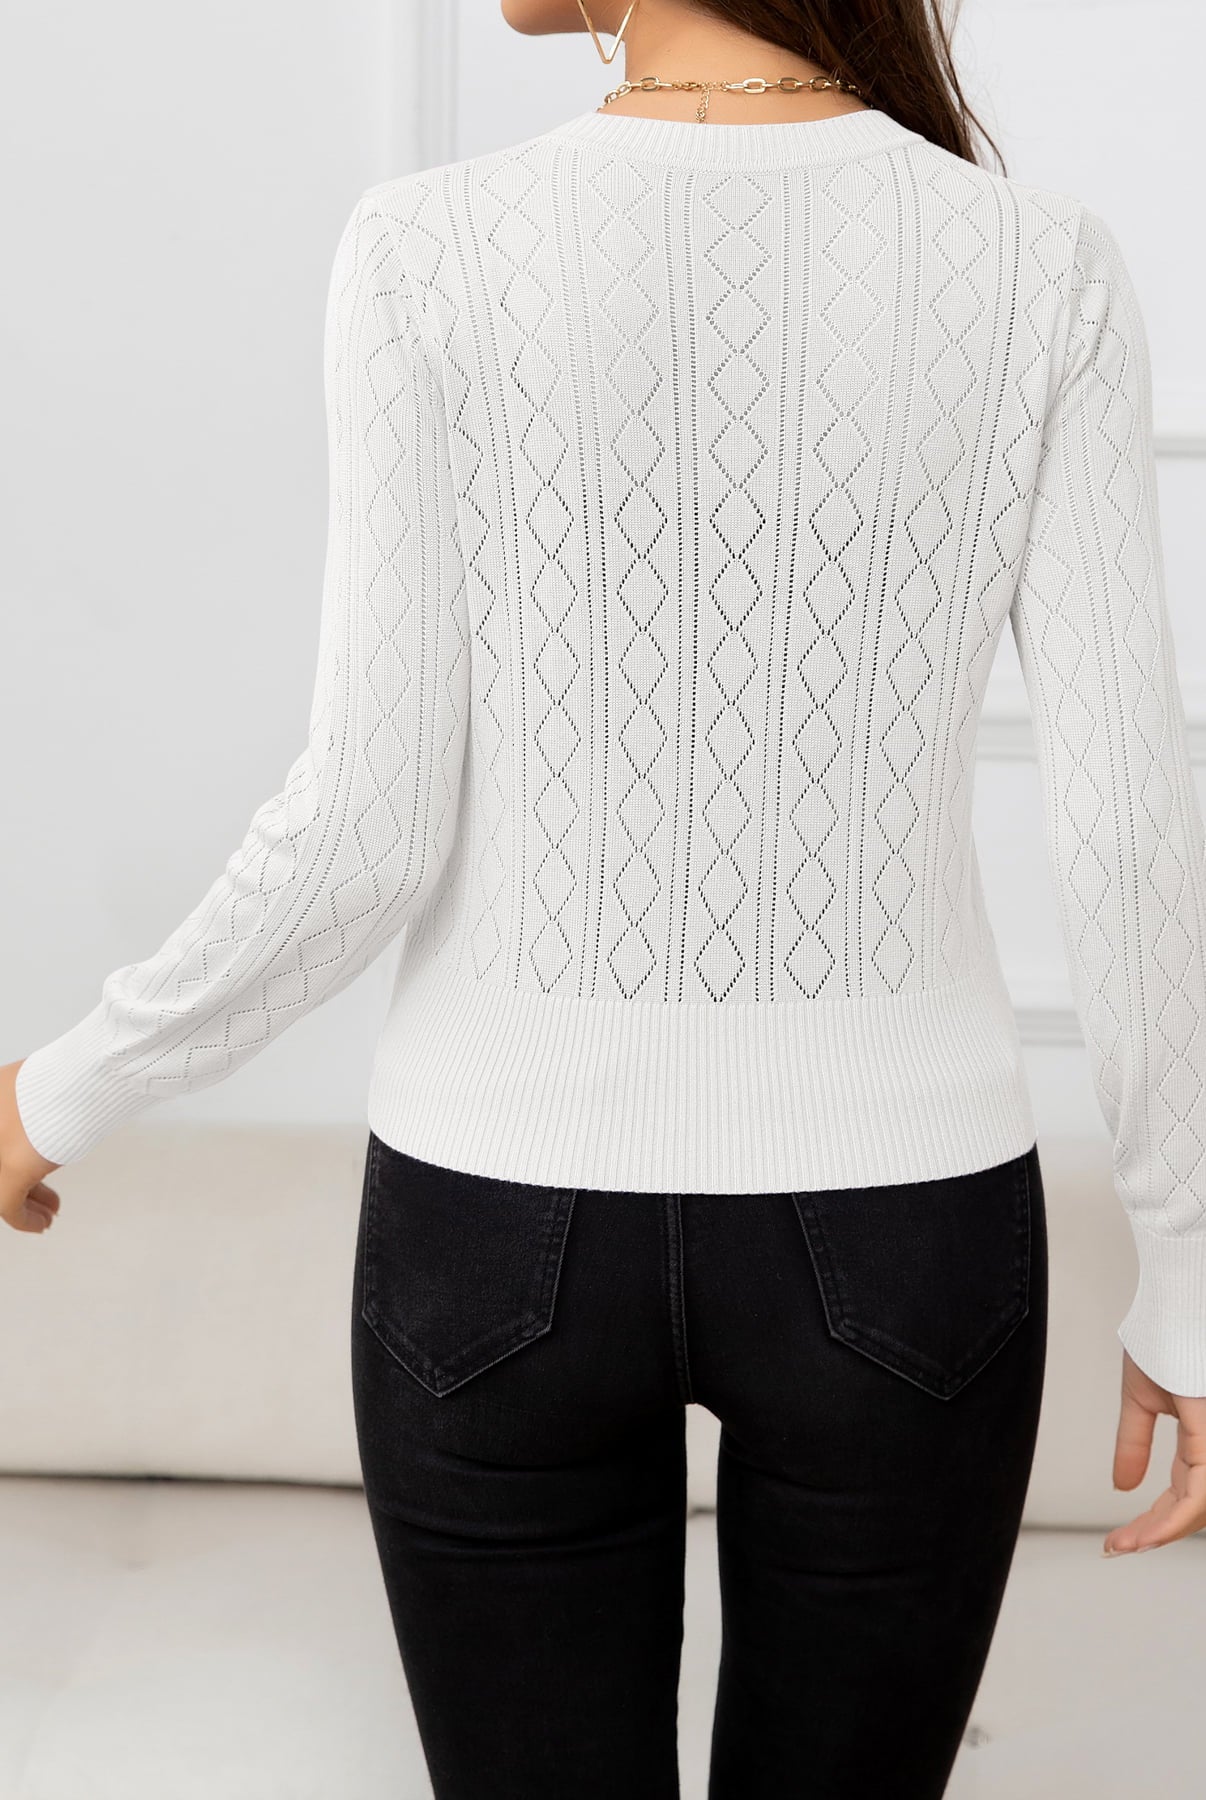 Light Gray V-Neck Buttoned Long Sleeve Knit Top Clothing